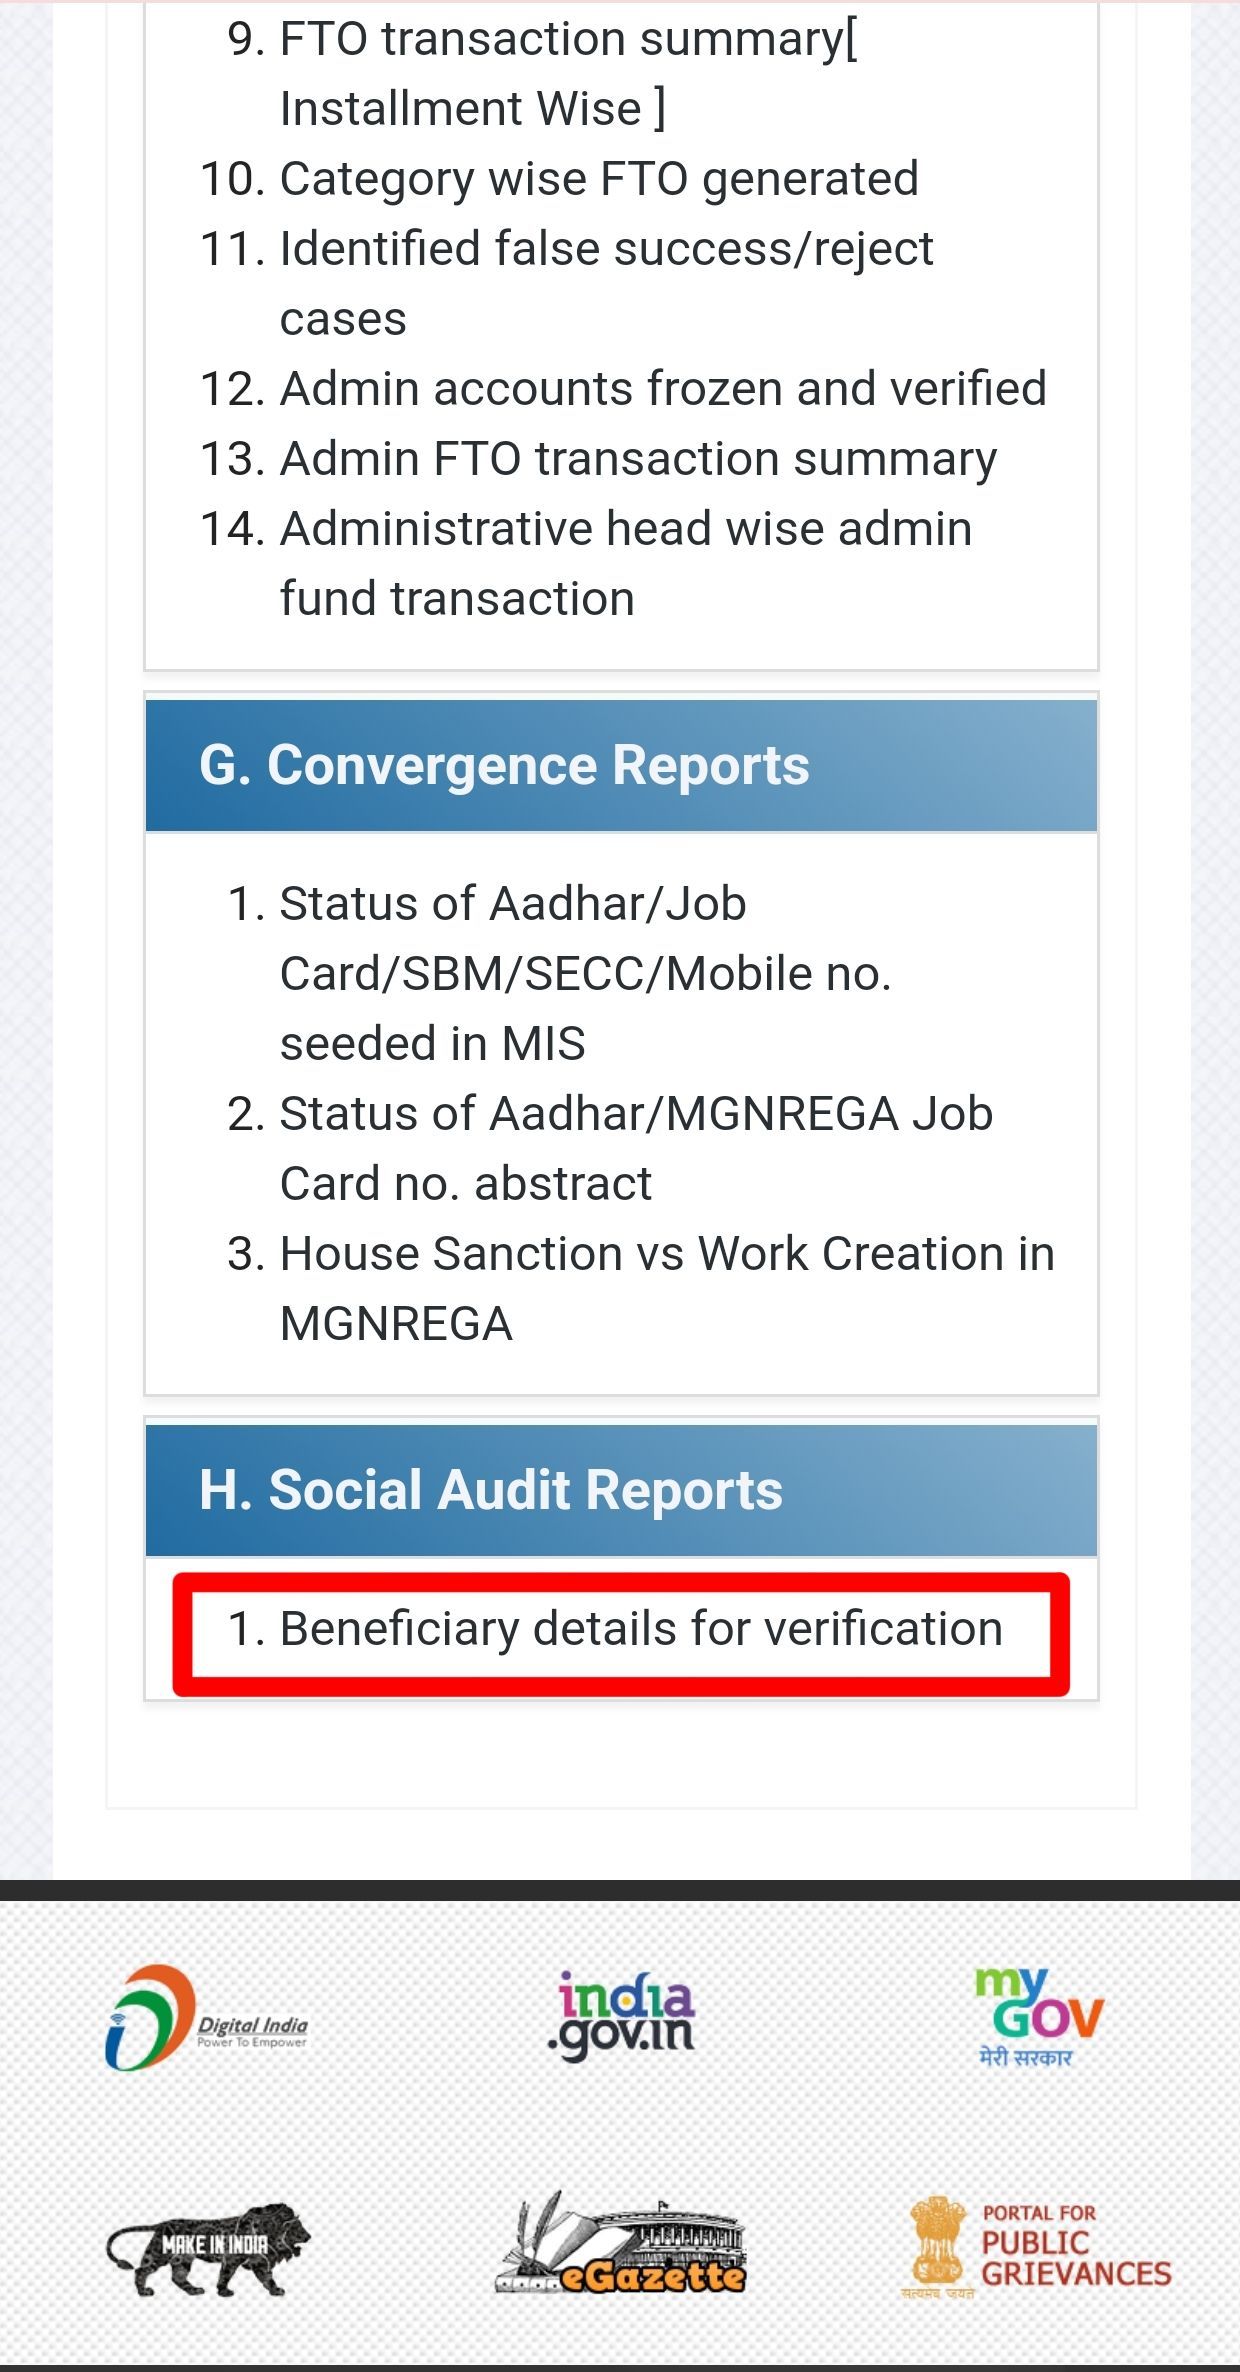 Beneficiary details for verification